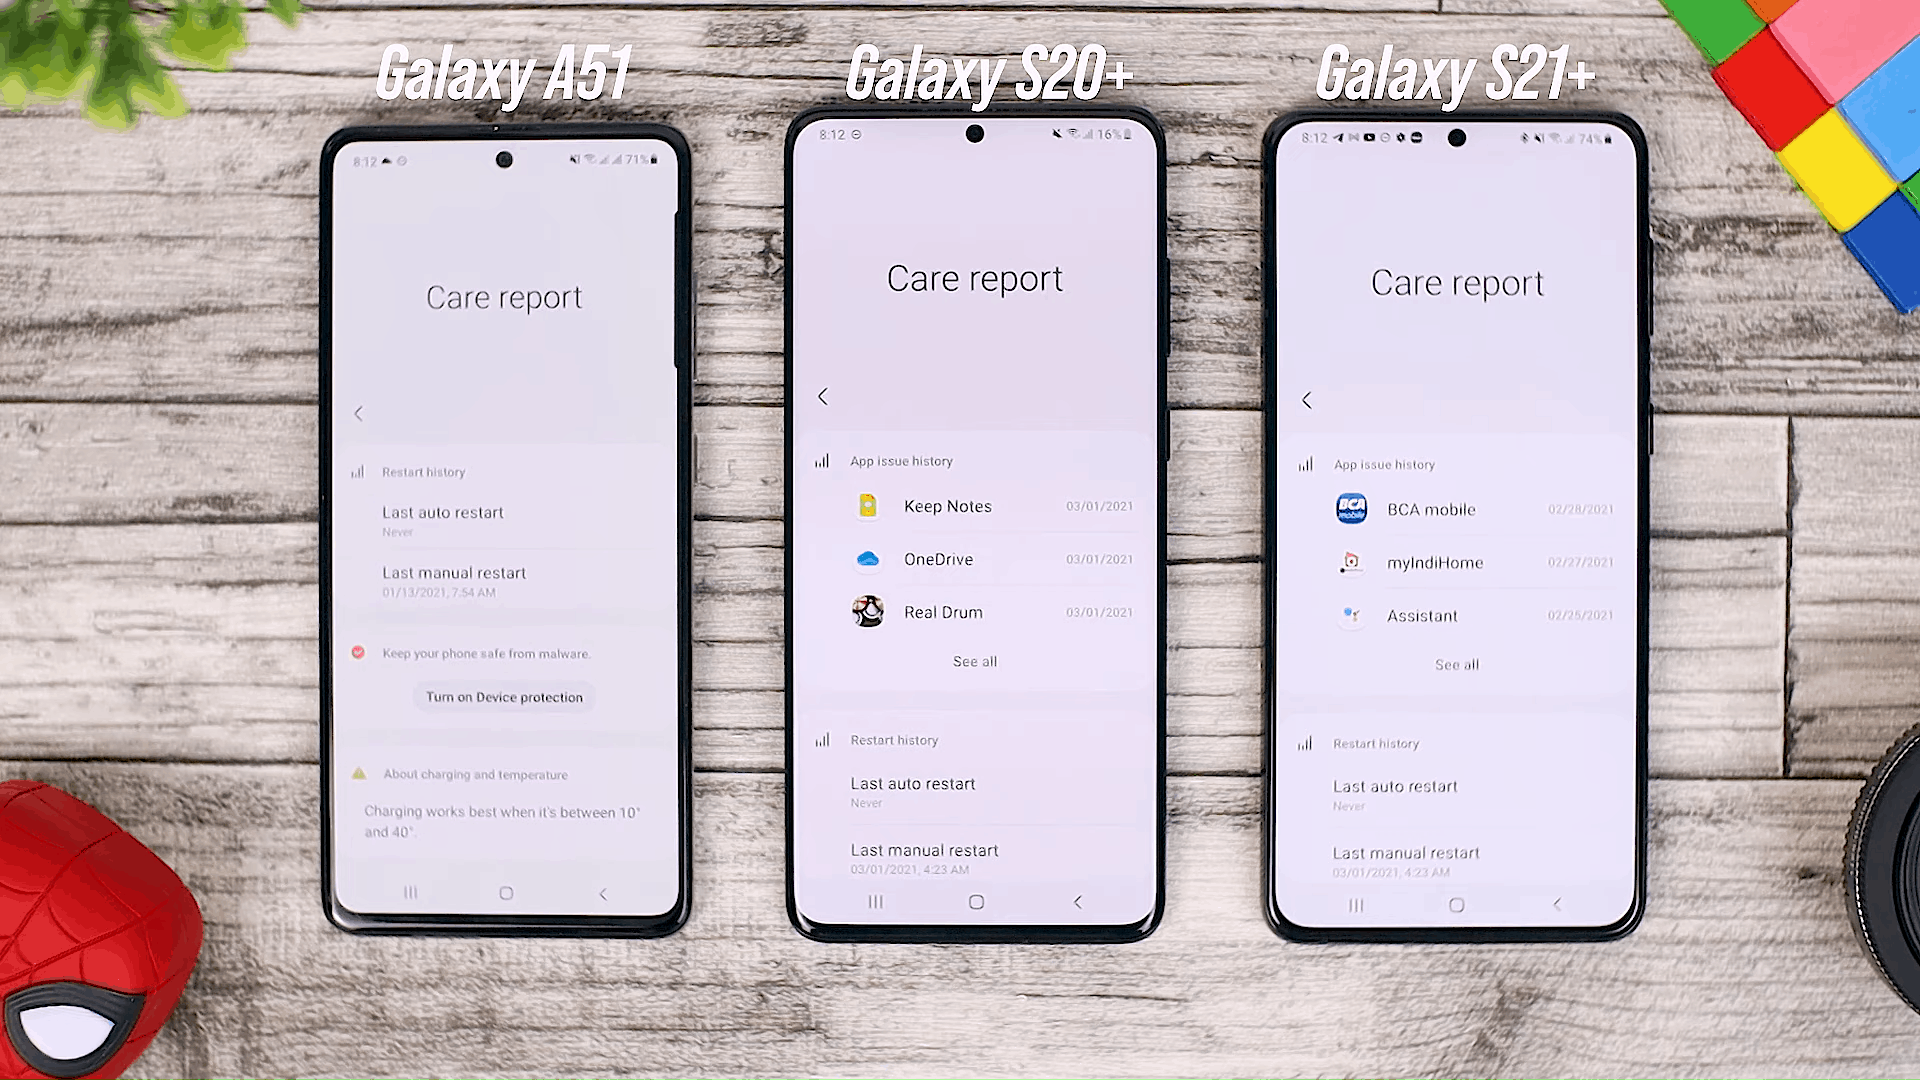 Care Report - One UI 3.0 features of Samsung Galaxy A51 and its comparison with the Galaxy S20+ and One UI 3.1 on the Galaxy S21+